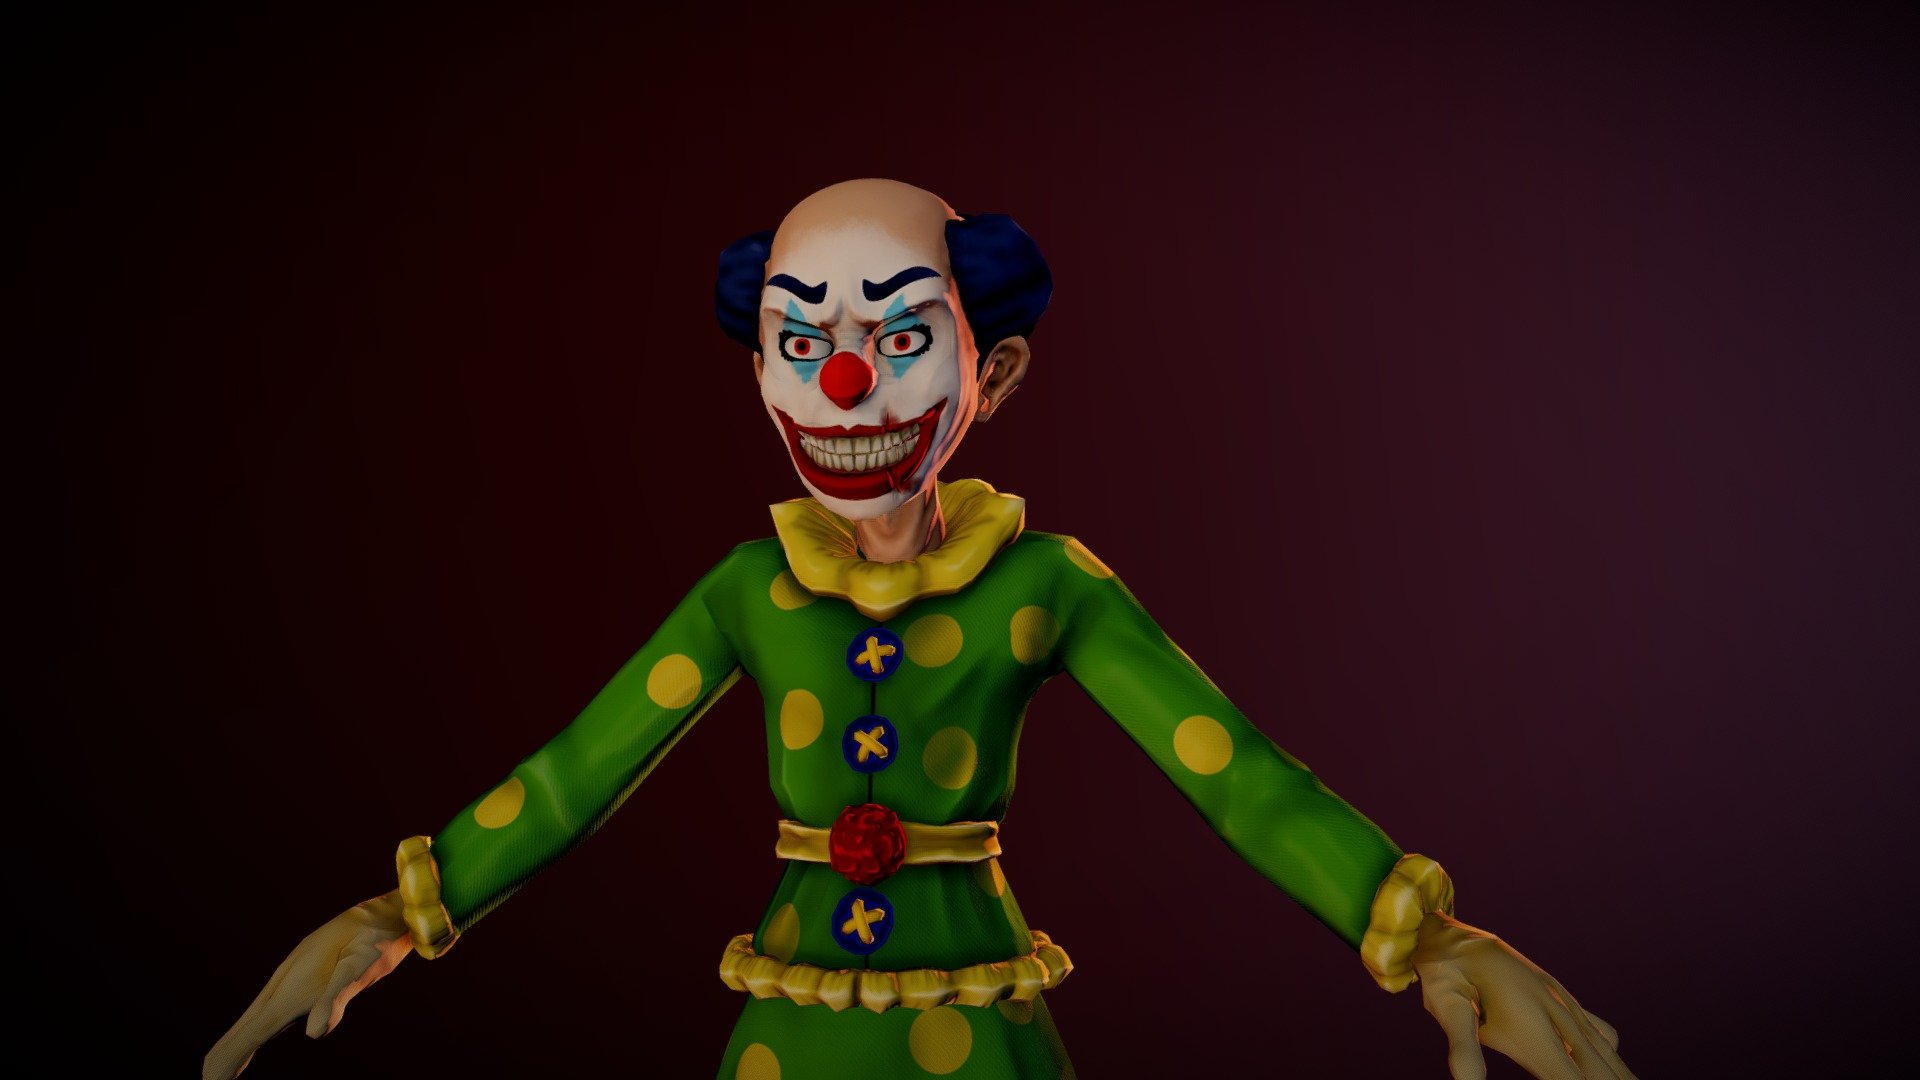 Texture for 
Arnold 
Unity
Unreal

No rigg - Creepy Clown - Buy Royalty Free 3D model by Xneysi 3d model